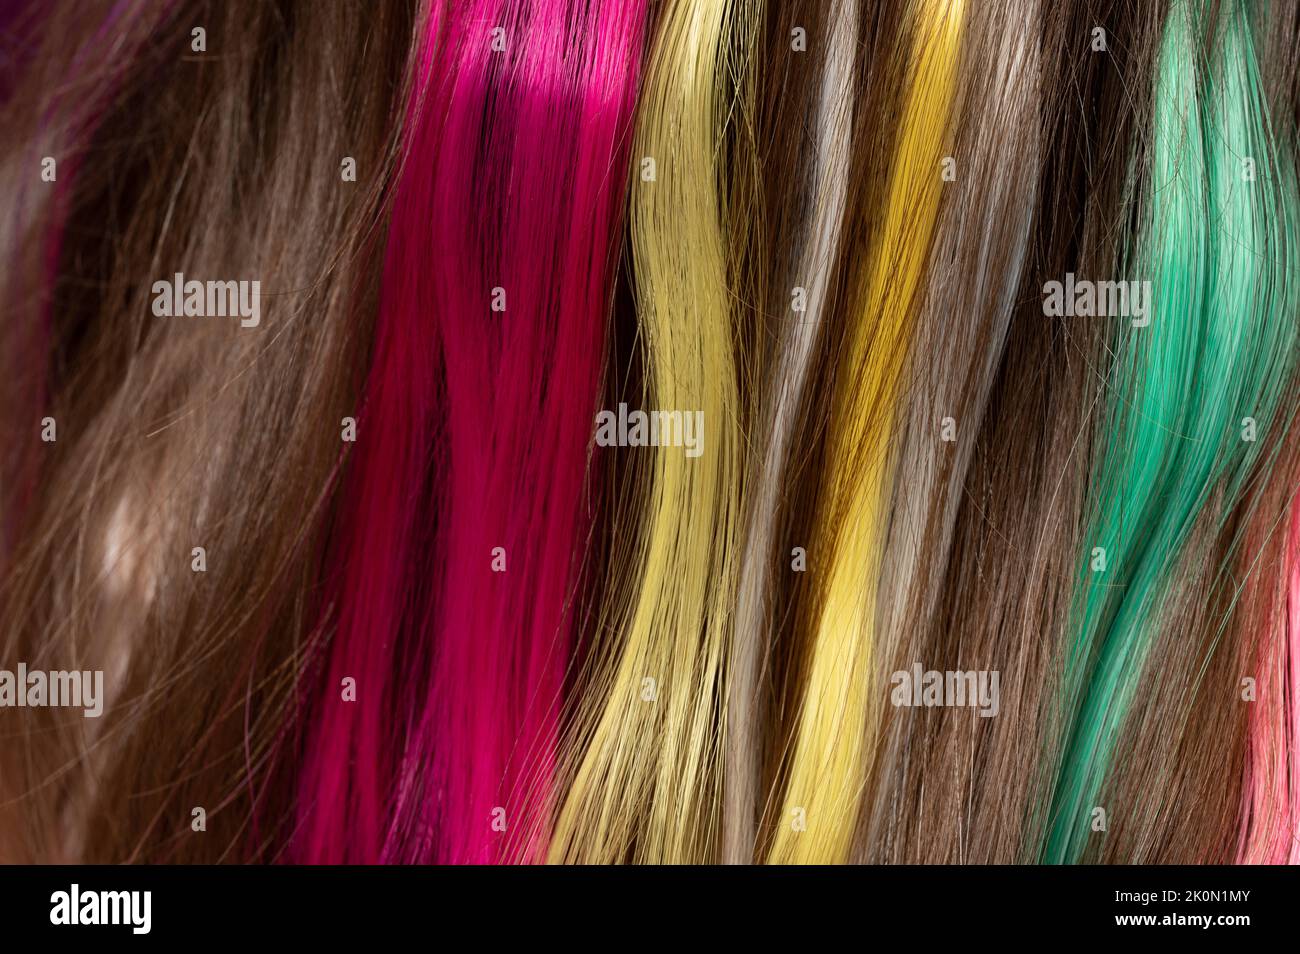 Wavy colorful hair background macro close up view Stock Photo